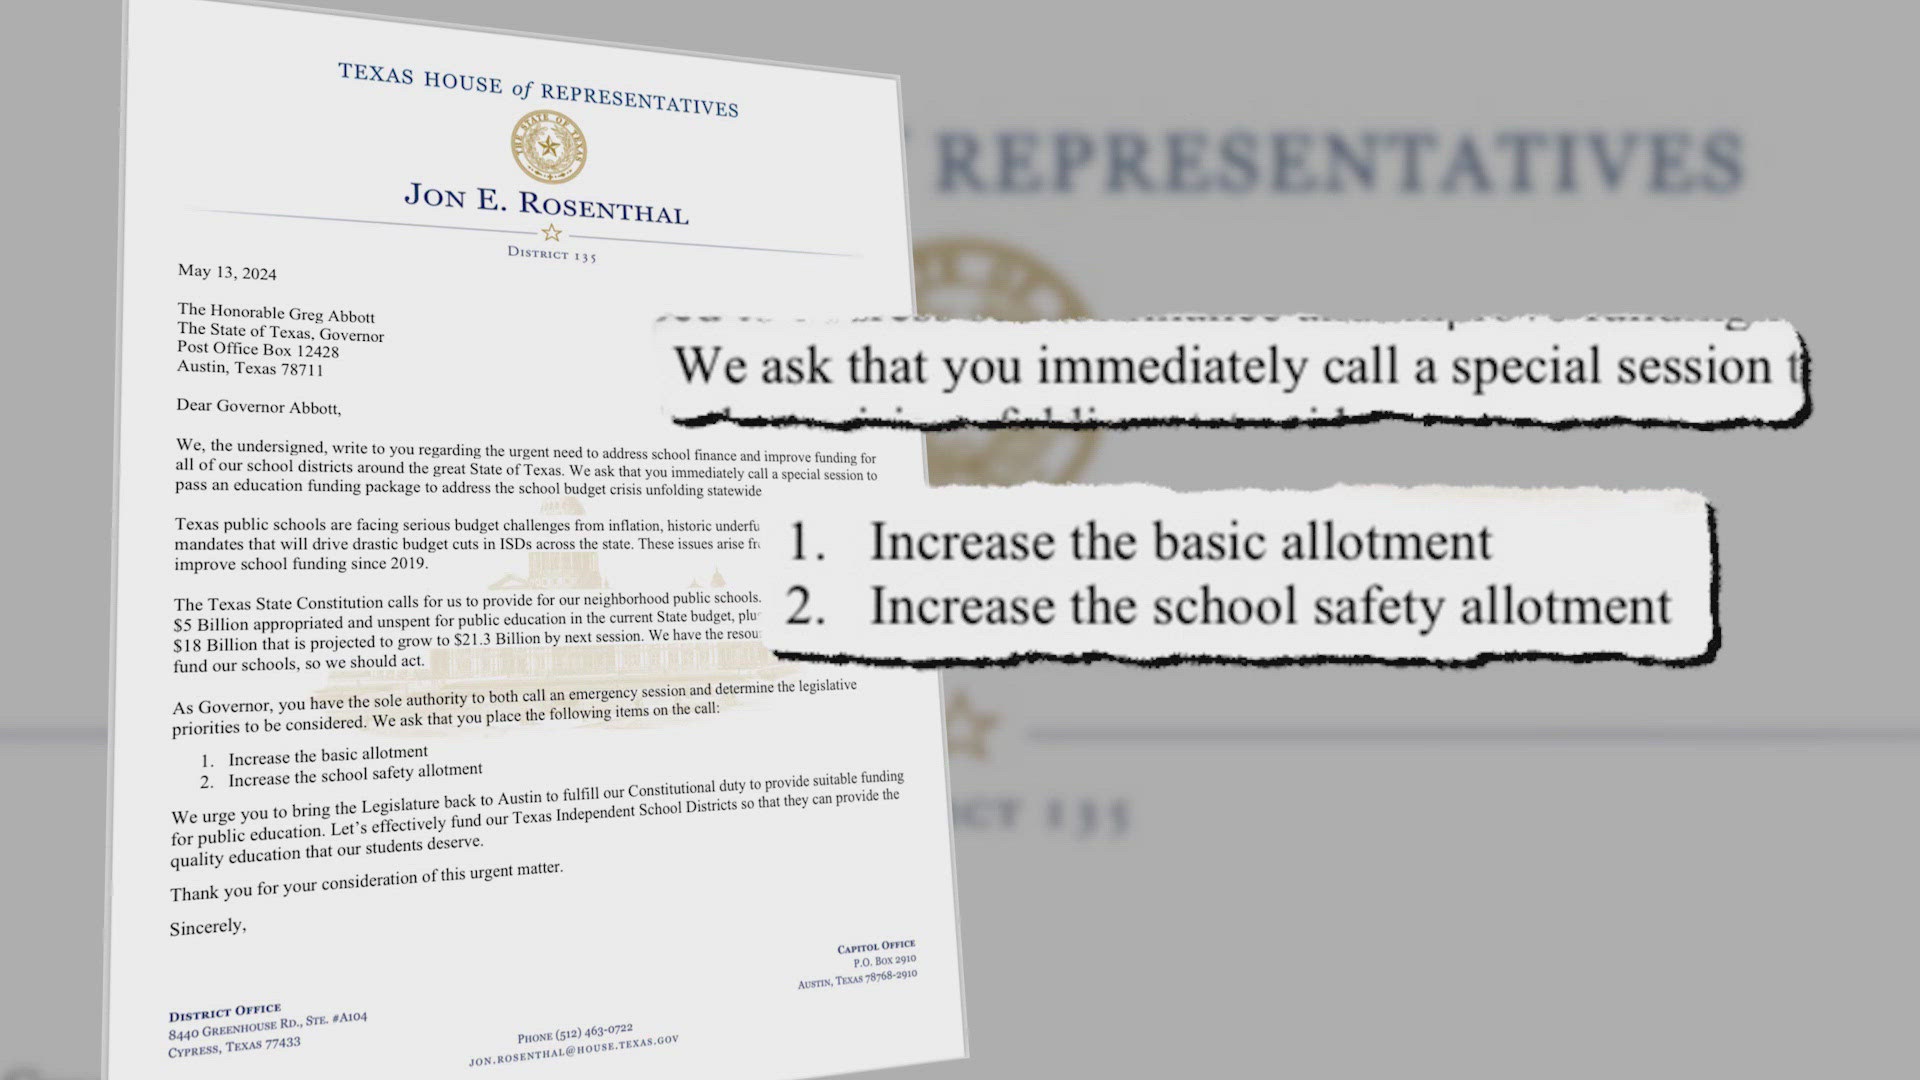 In a letter to Governor Abbott, Democratic representative Jon Rosenthal said the state is in desperate need of an increase in school funding.